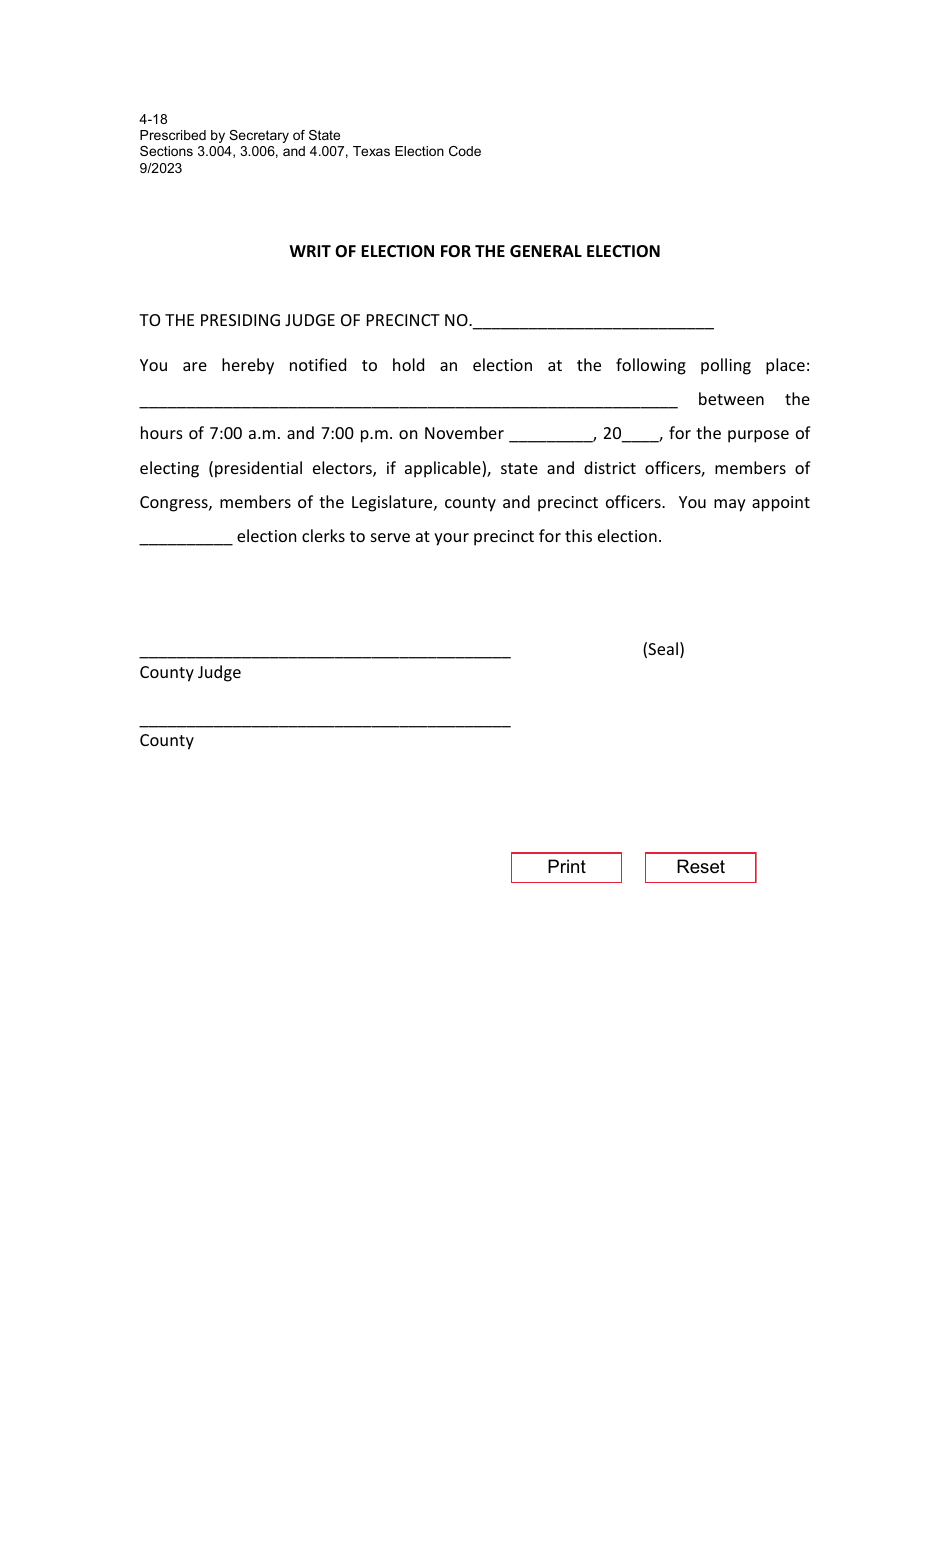 Form 4-18 Writ of Election for the General Election - Texas, Page 1